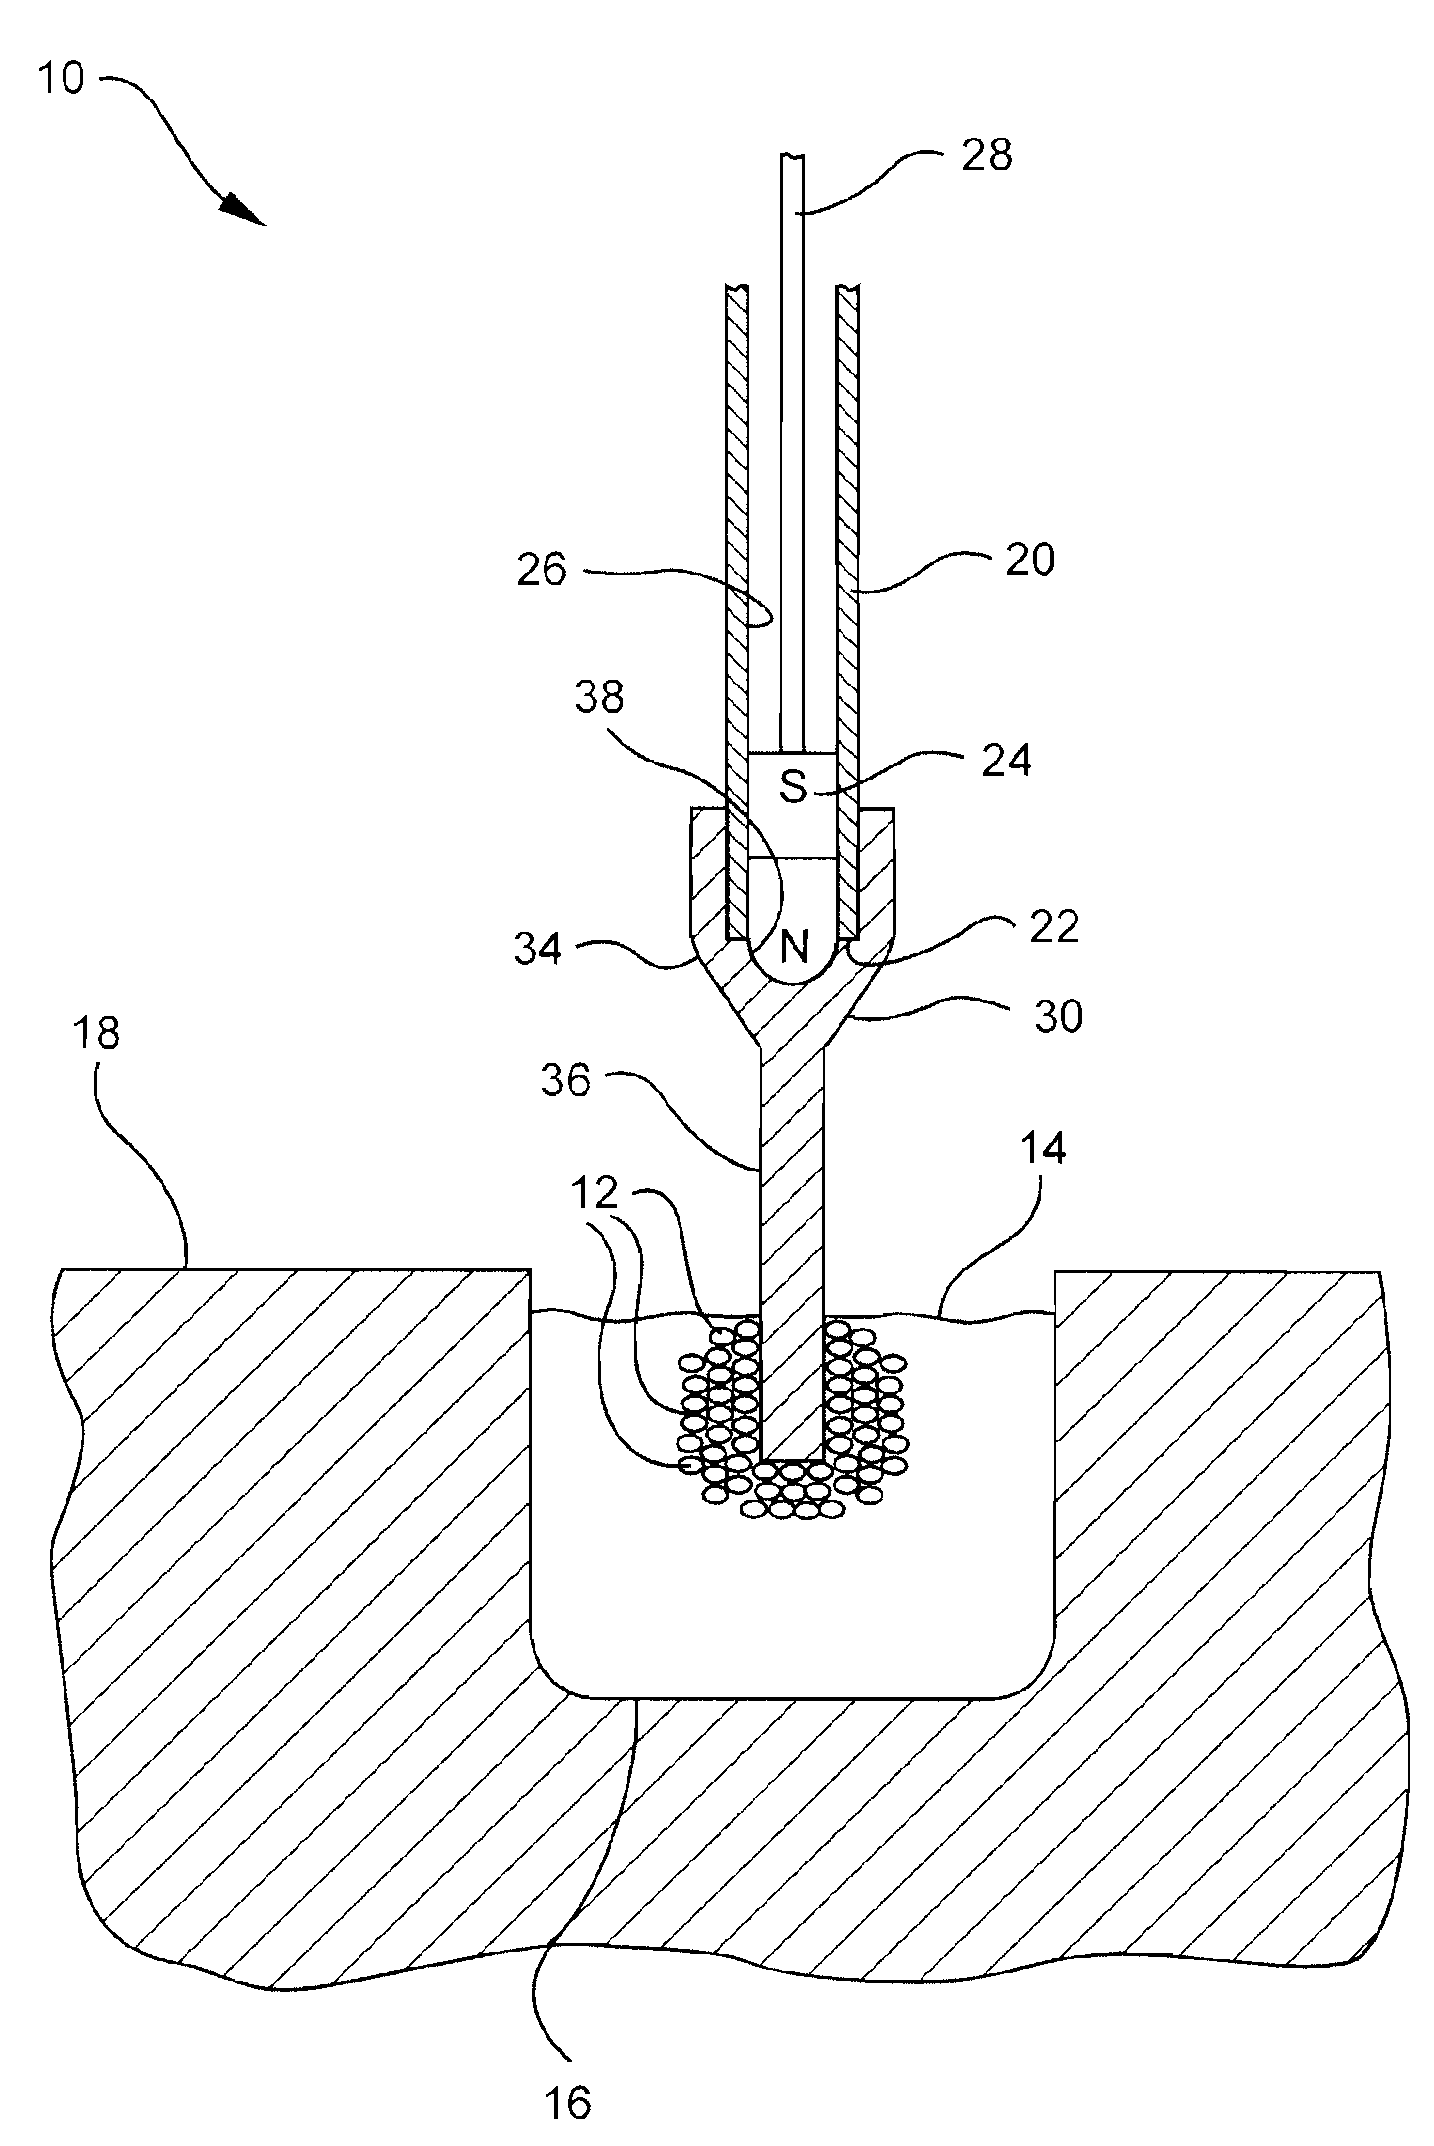 Flux concentrator for biomagnetic particle transfer device